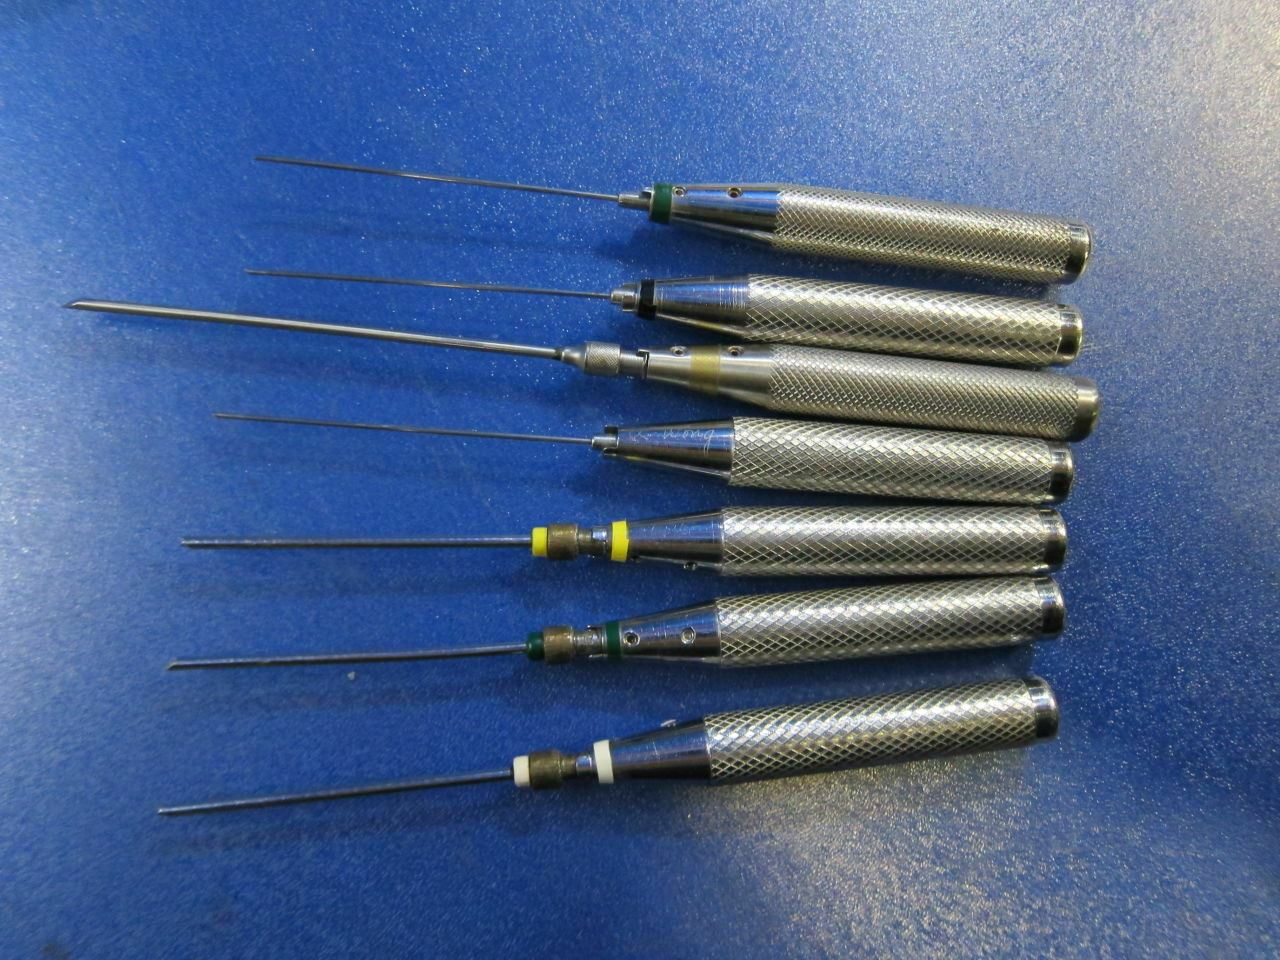 11 Unknown Surgical Tools with Case DIAGNOSTIC ULTRASOUND MACHINES FOR SALE